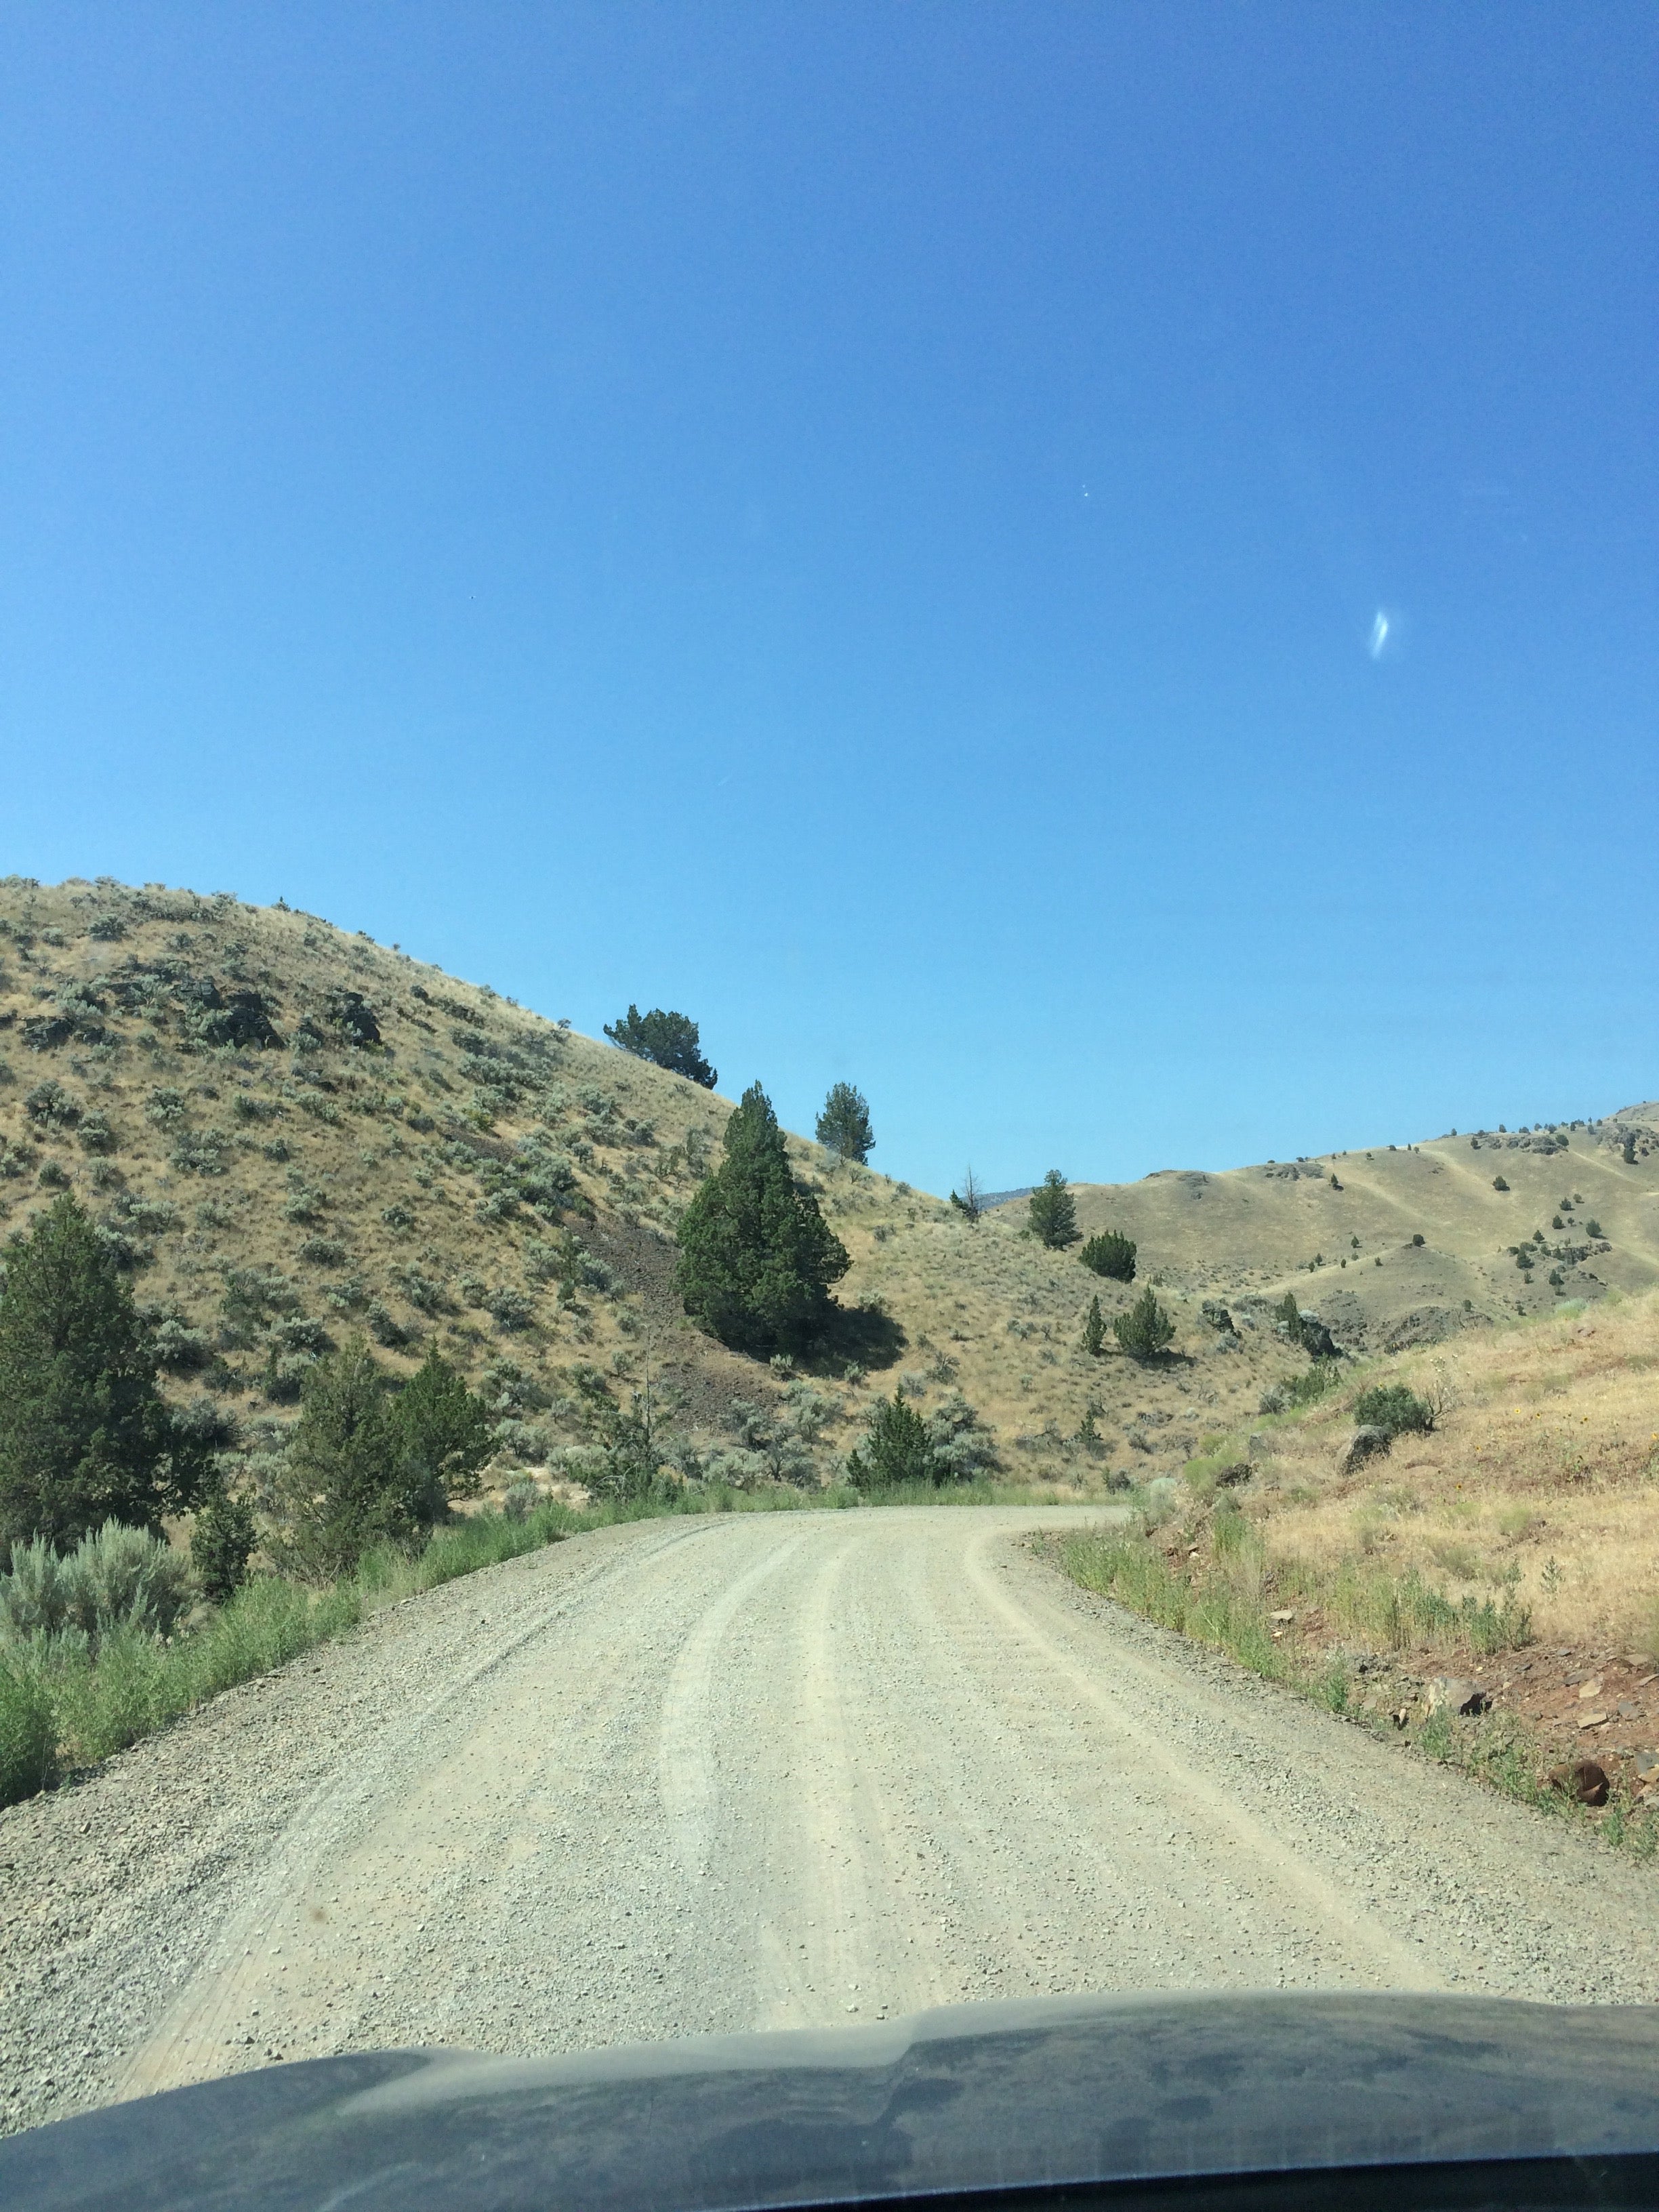 Dirt/rock road for several miles before getting to Priest Hole. Goes around some curves with slight drop-offs.